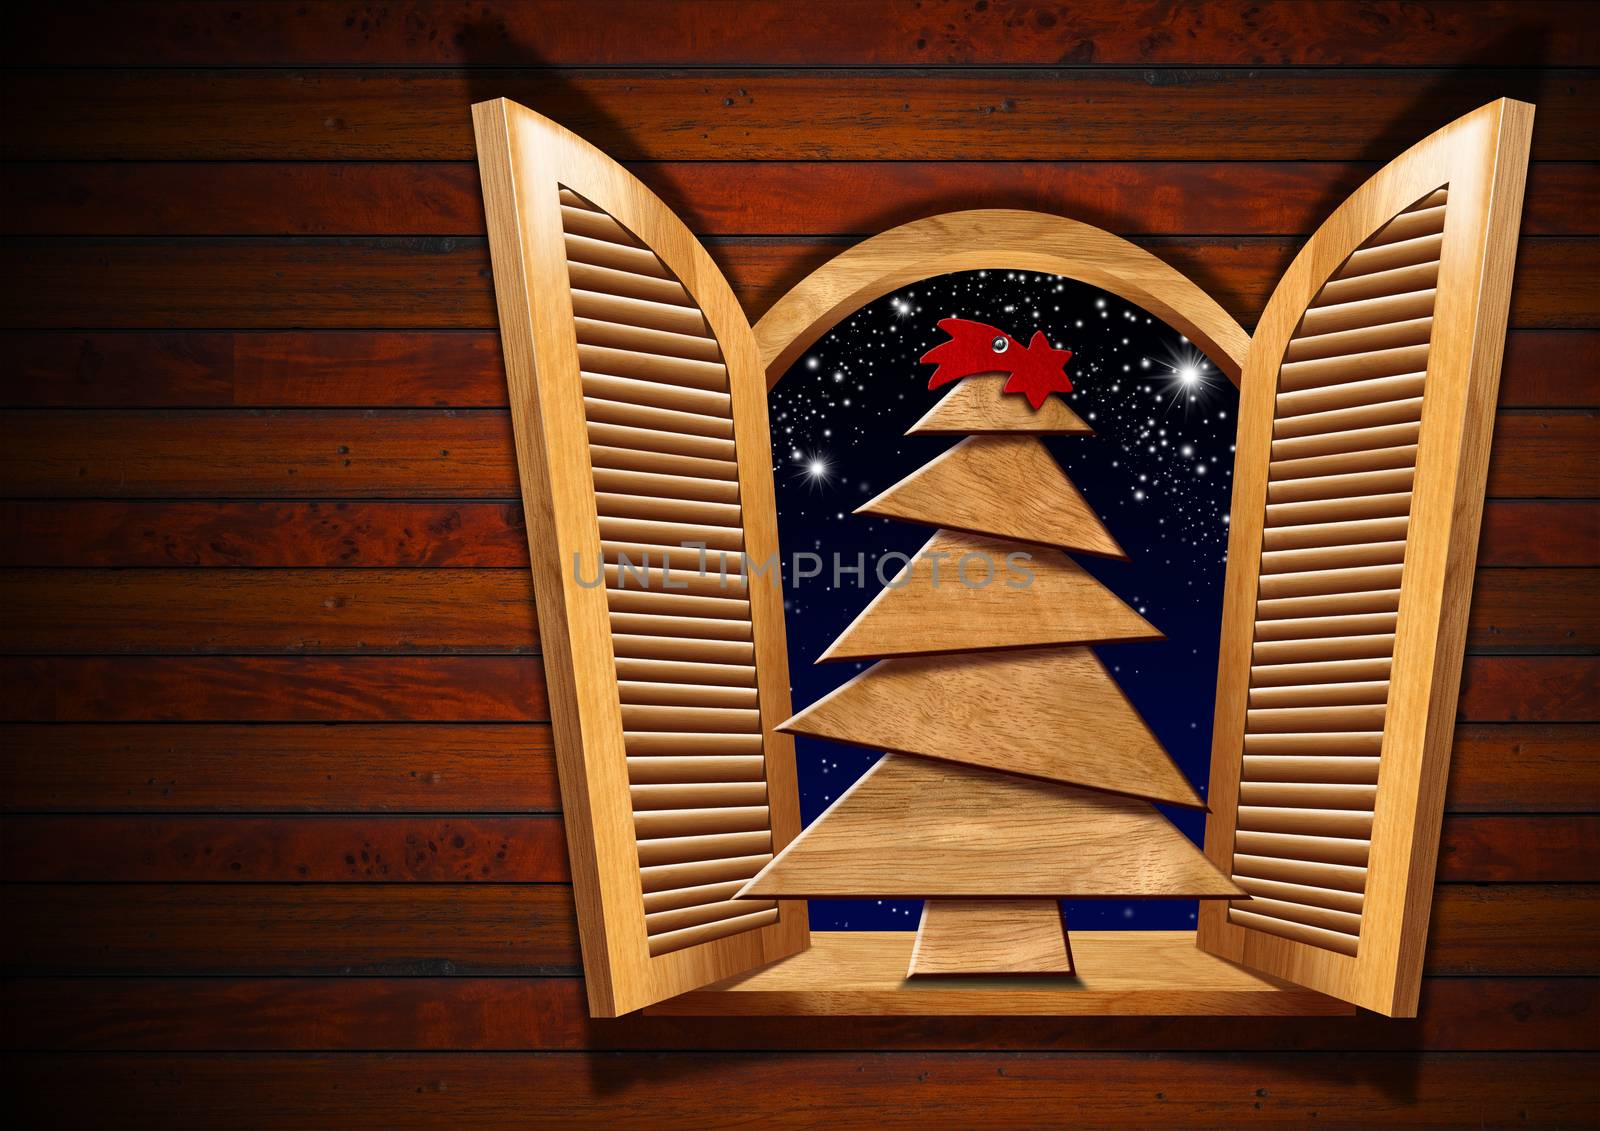 Wooden Christmas tree on the sill of an open window. Wooden wall with copy space